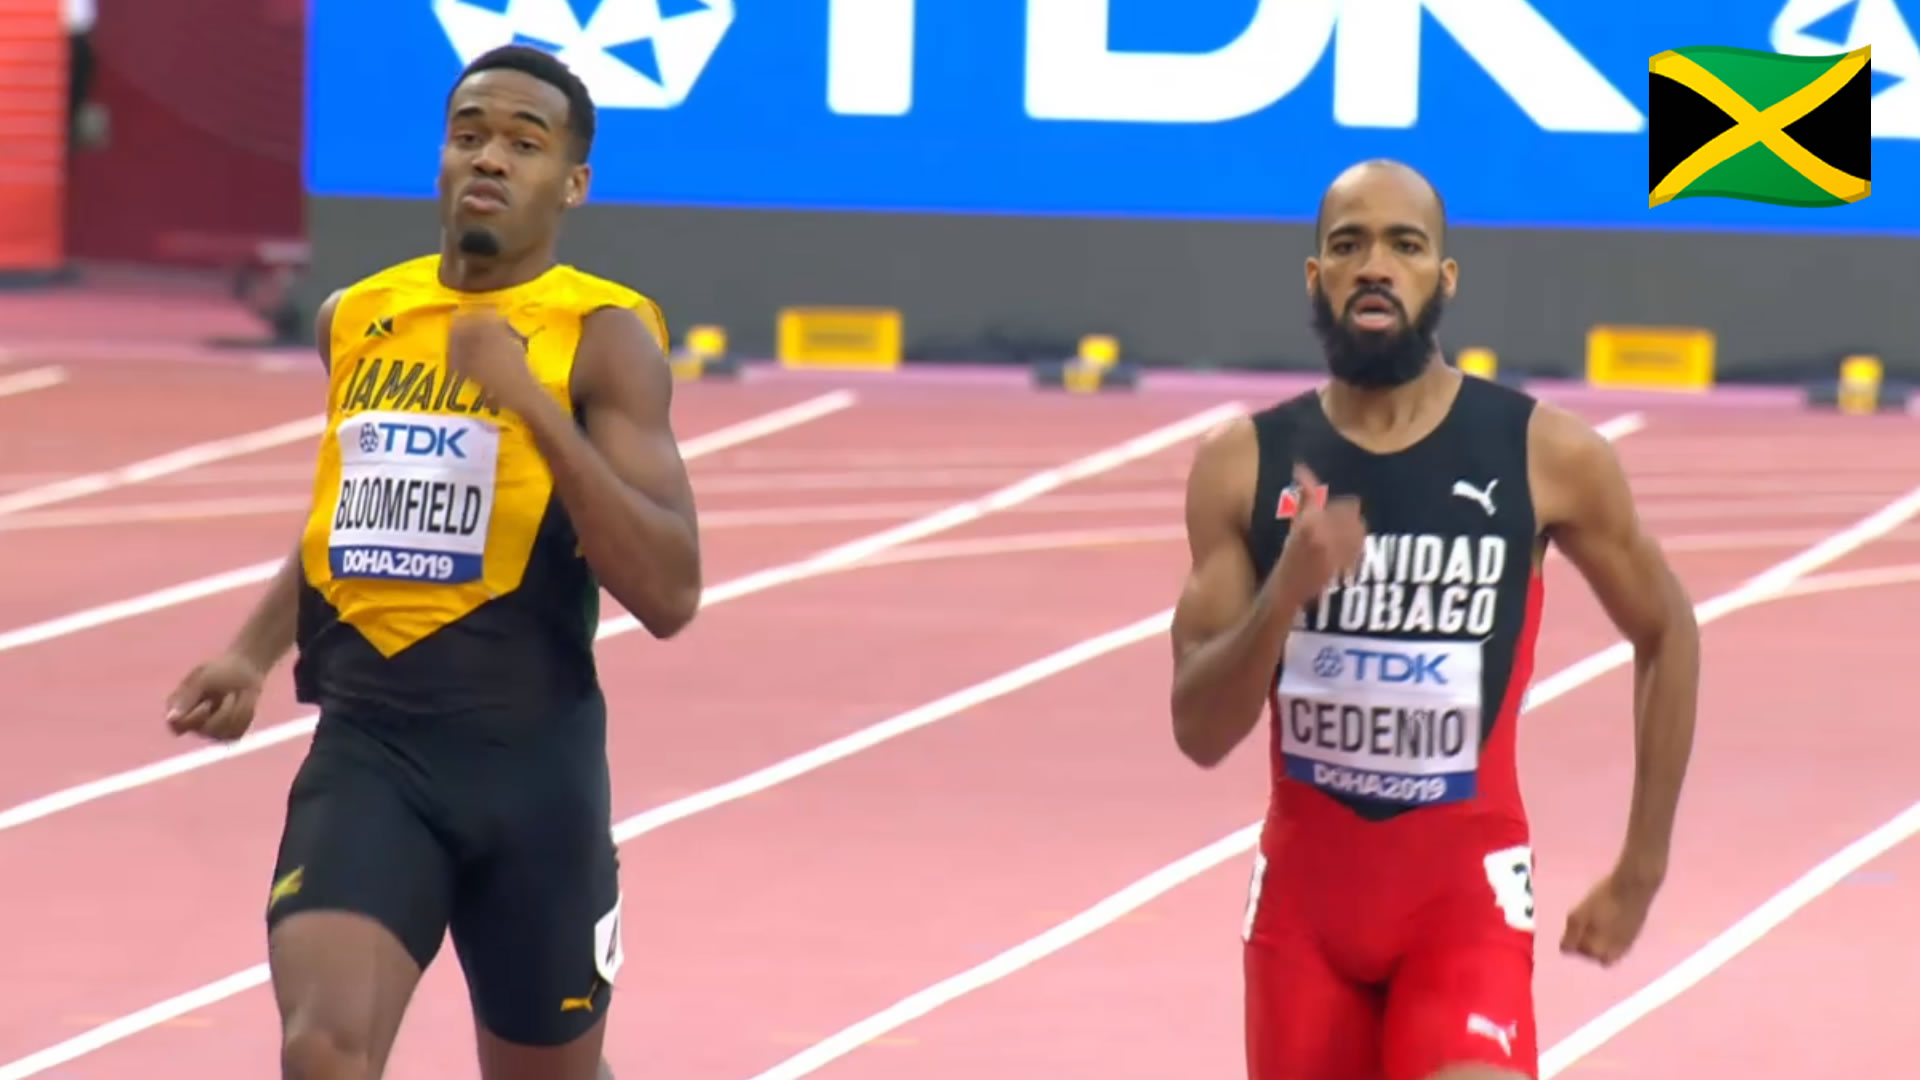 Watch: Akeem Bloomfield qualifies for 400m semi-finals at World Champs